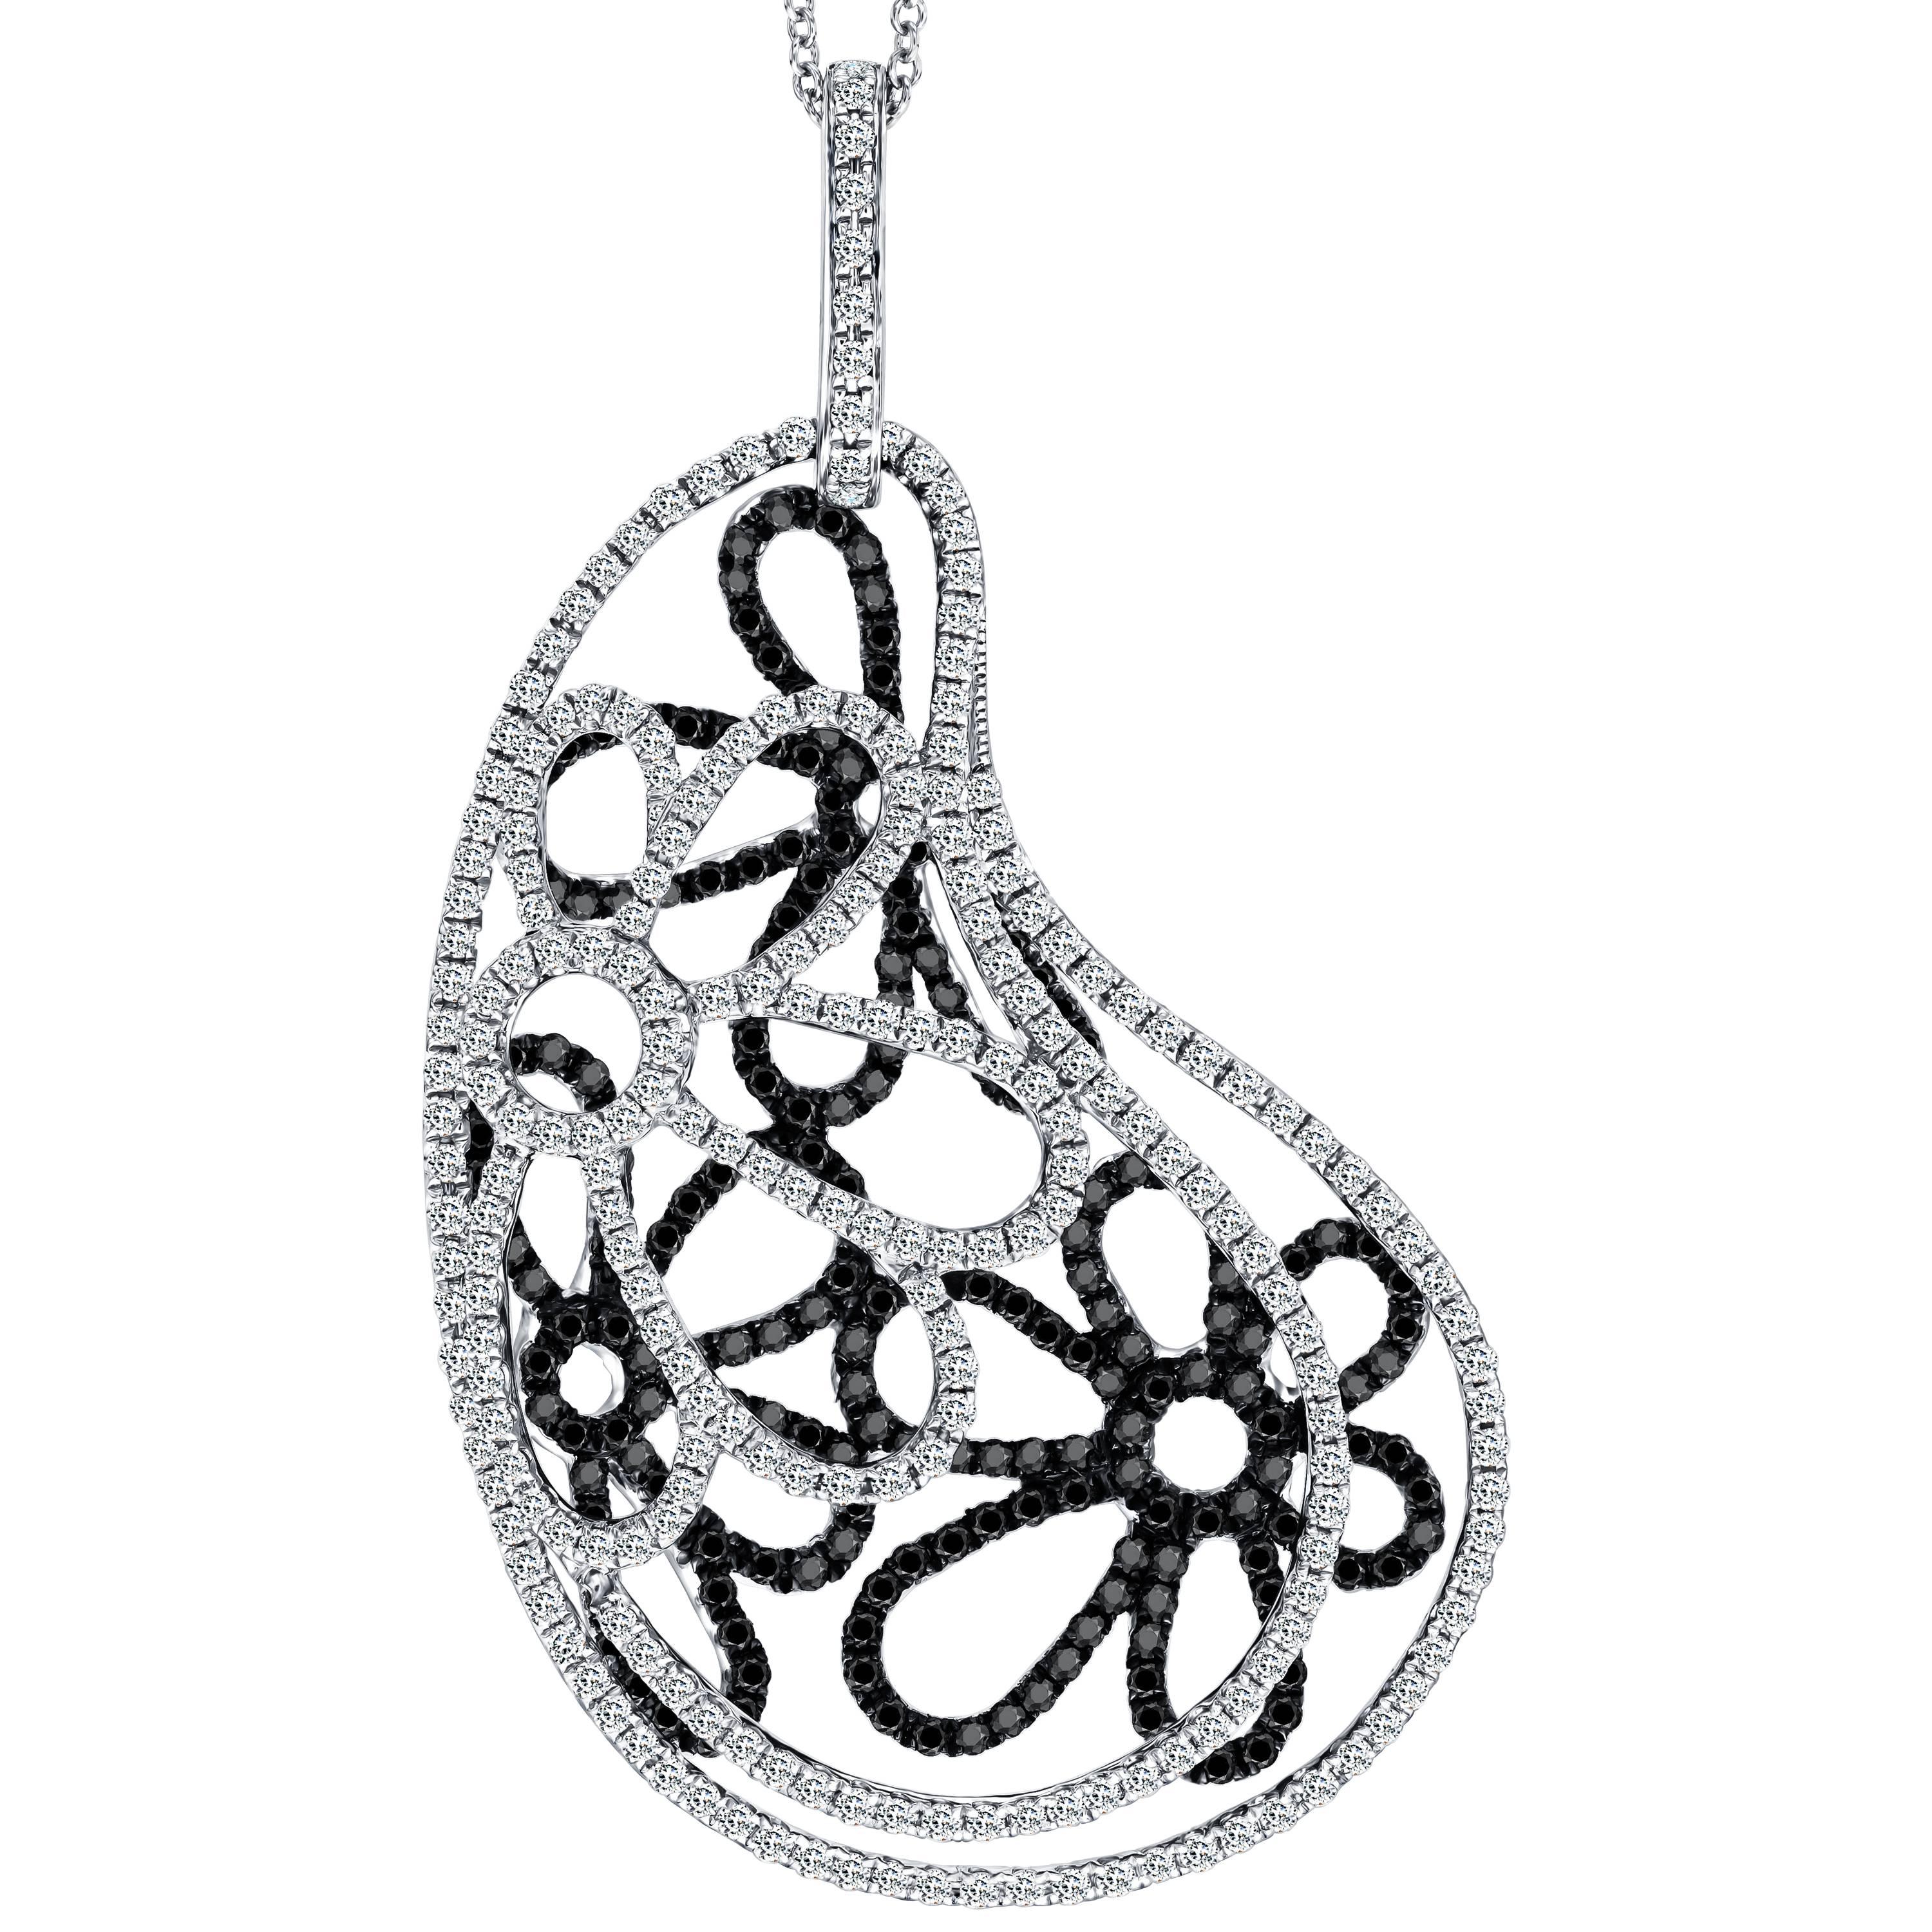 This bespoke fancy floral pendant is encrusted with a total of 2.44 Carat diamonds (1.13 Carat White Diamonds and 1.31 Carat Black Diamonds) high-quality white diamonds G - H colour and eye clean clarity SI. this exquisite and unique filigree